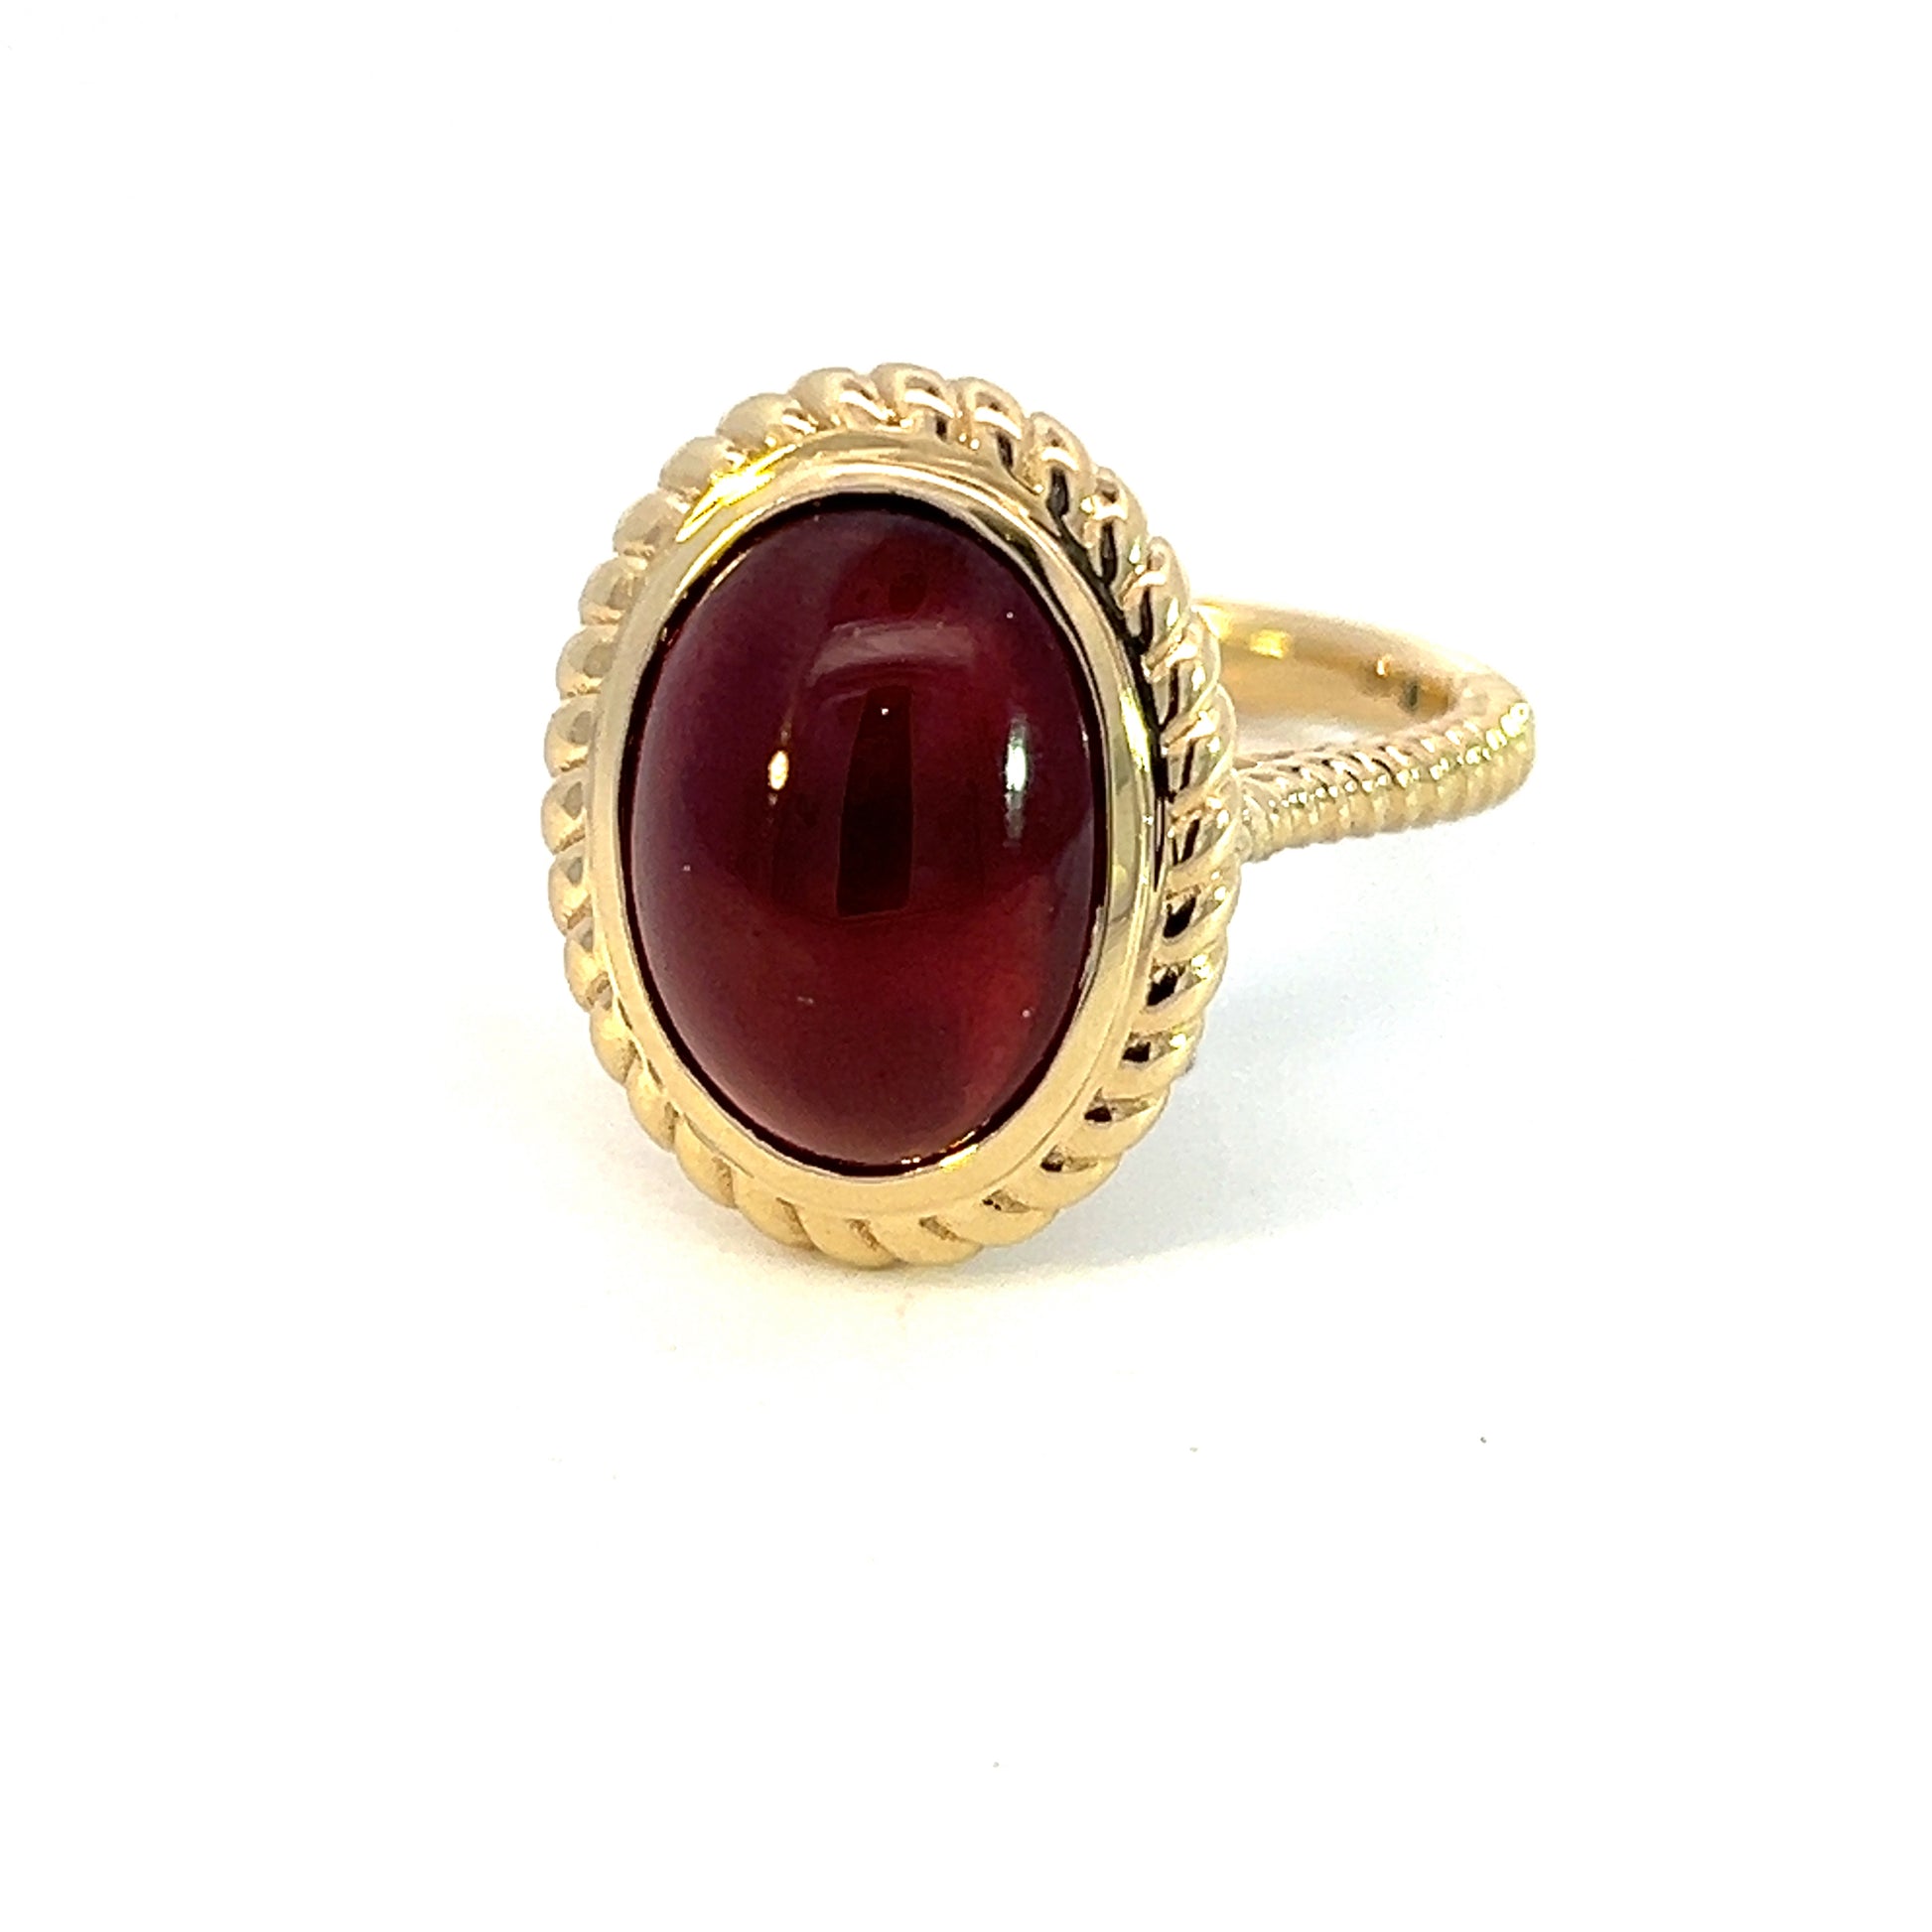 Natural Solitaire Spessartite Garnet Ring 6.5 14k Y Gold 8.08 Cts Certified $3,150 310586 - Certified Fine Jewelry